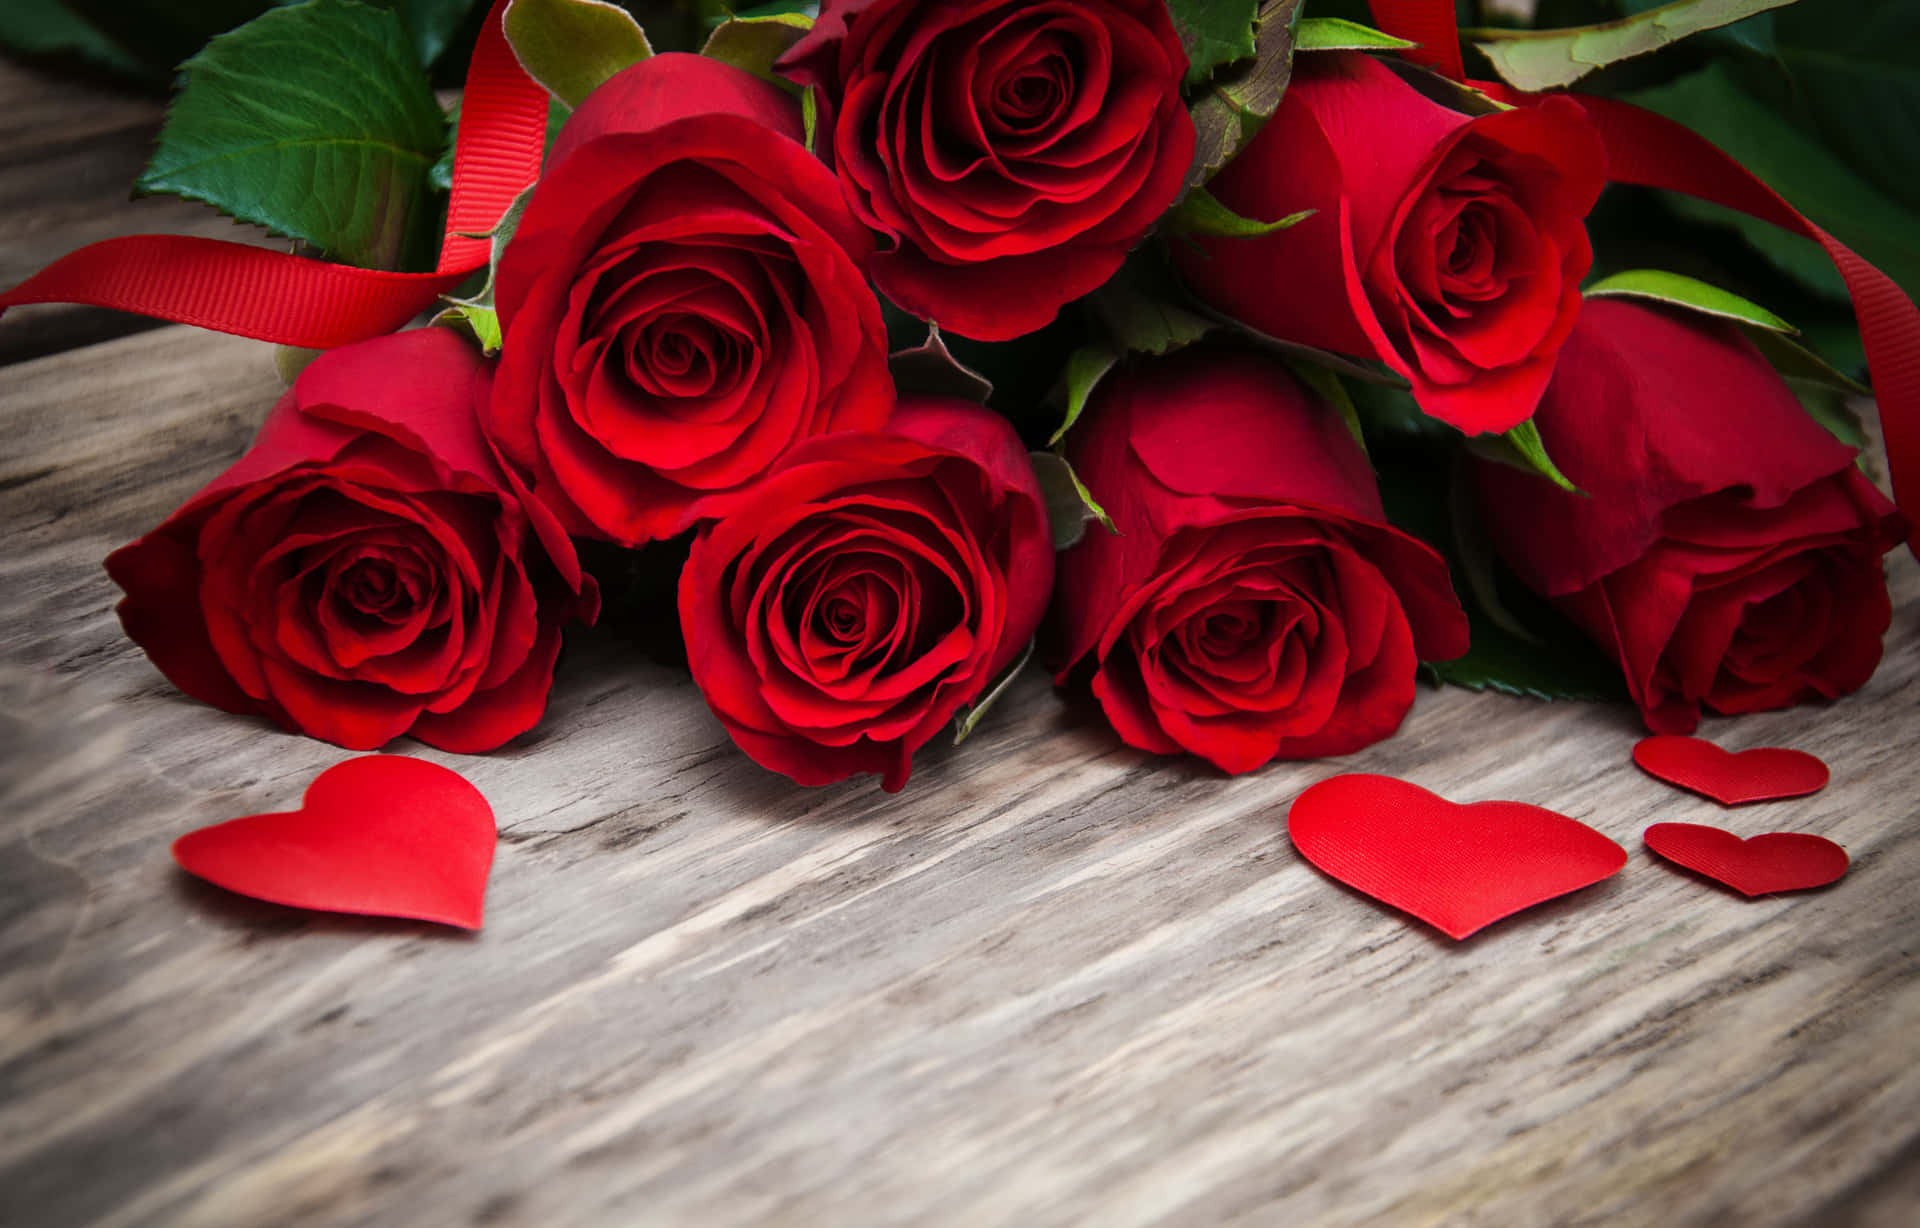 Red Roses With Hearts On A Wooden Table Wallpaper